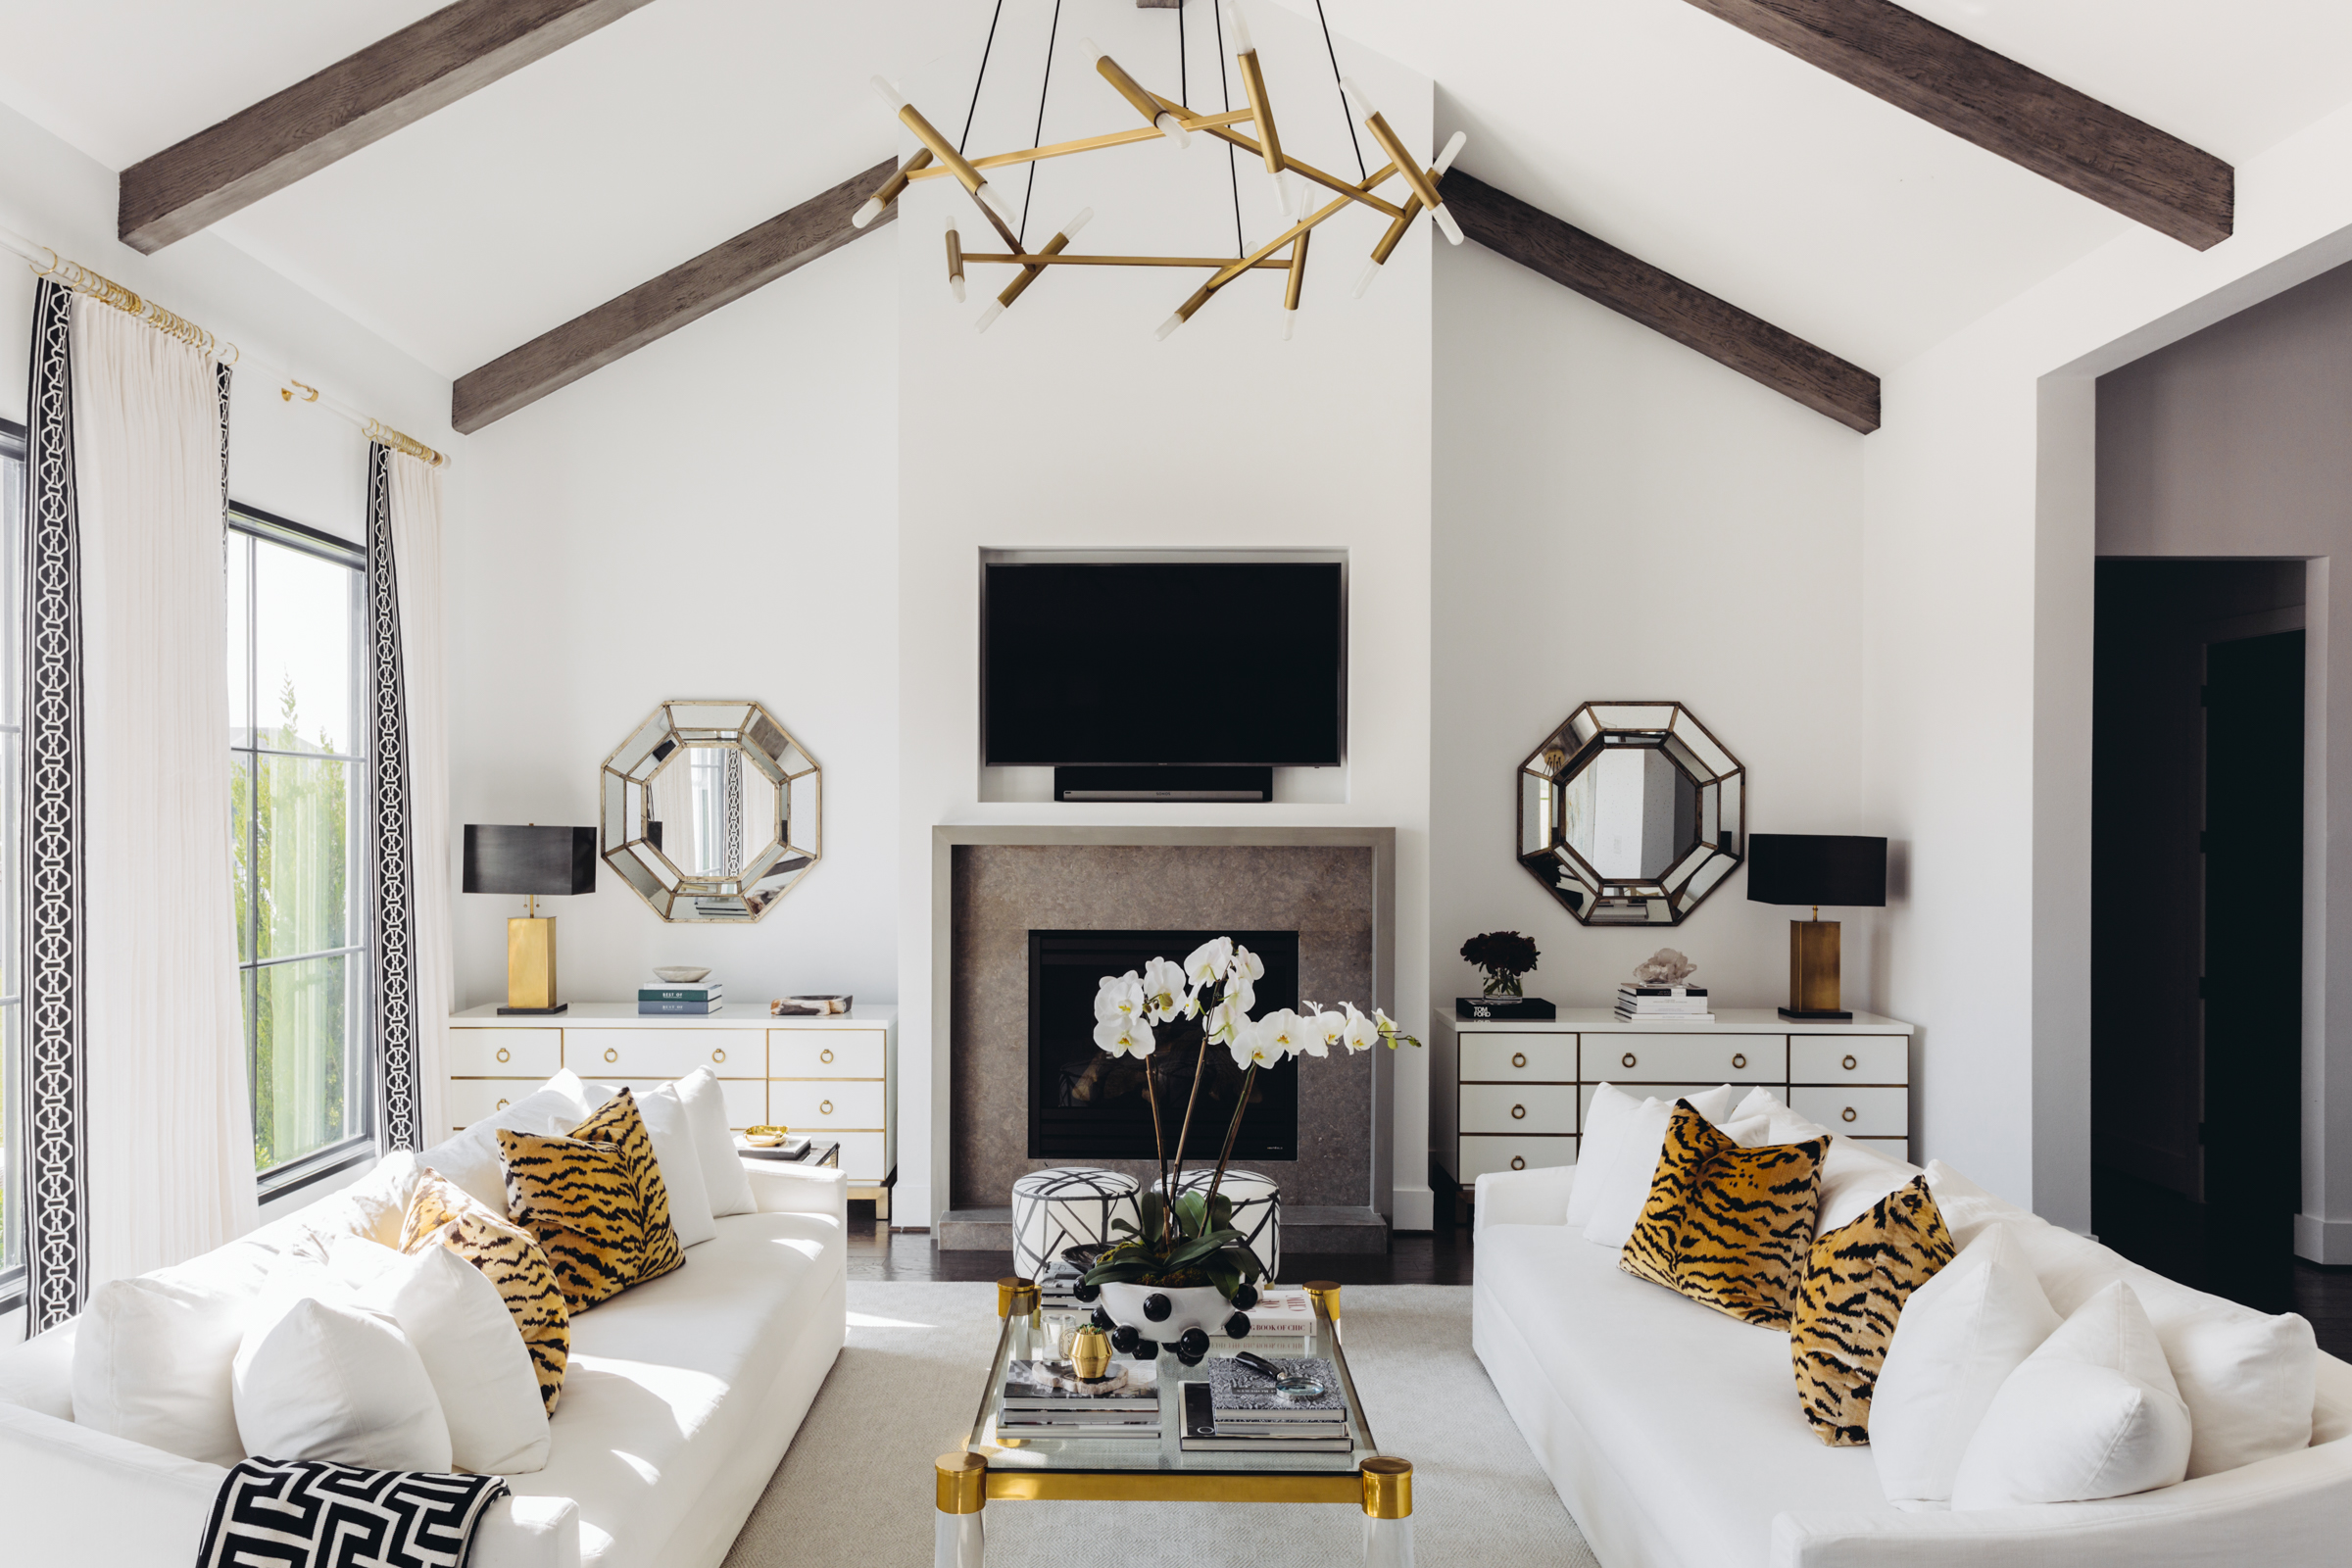 25 Ways to Decorate a White Monochrome Living Room